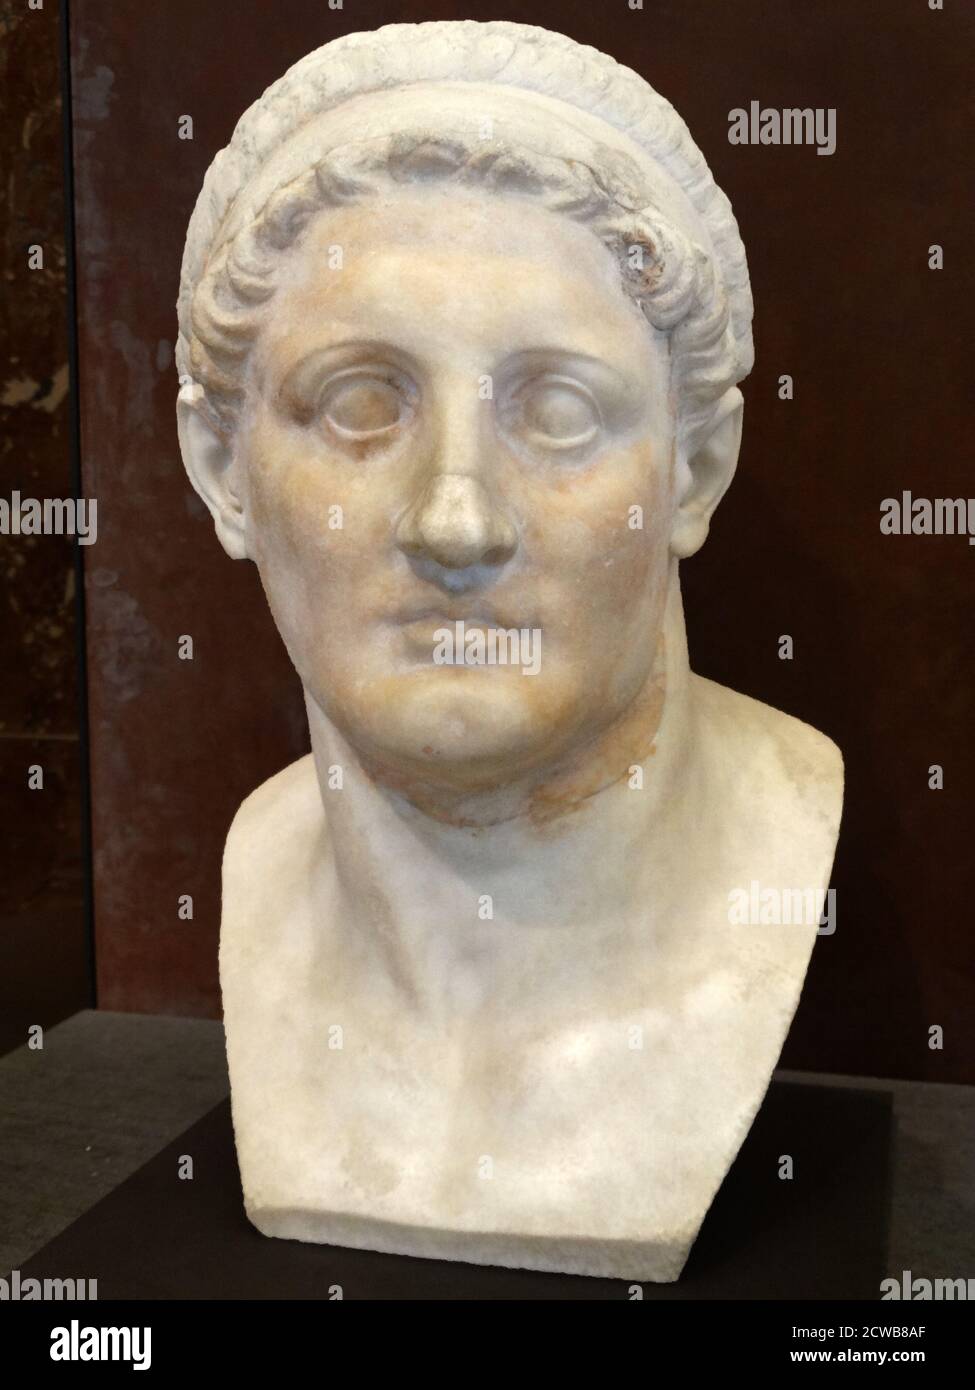 Head of Ptolemy I Soter (367-283 BC), from the Louvre's collection